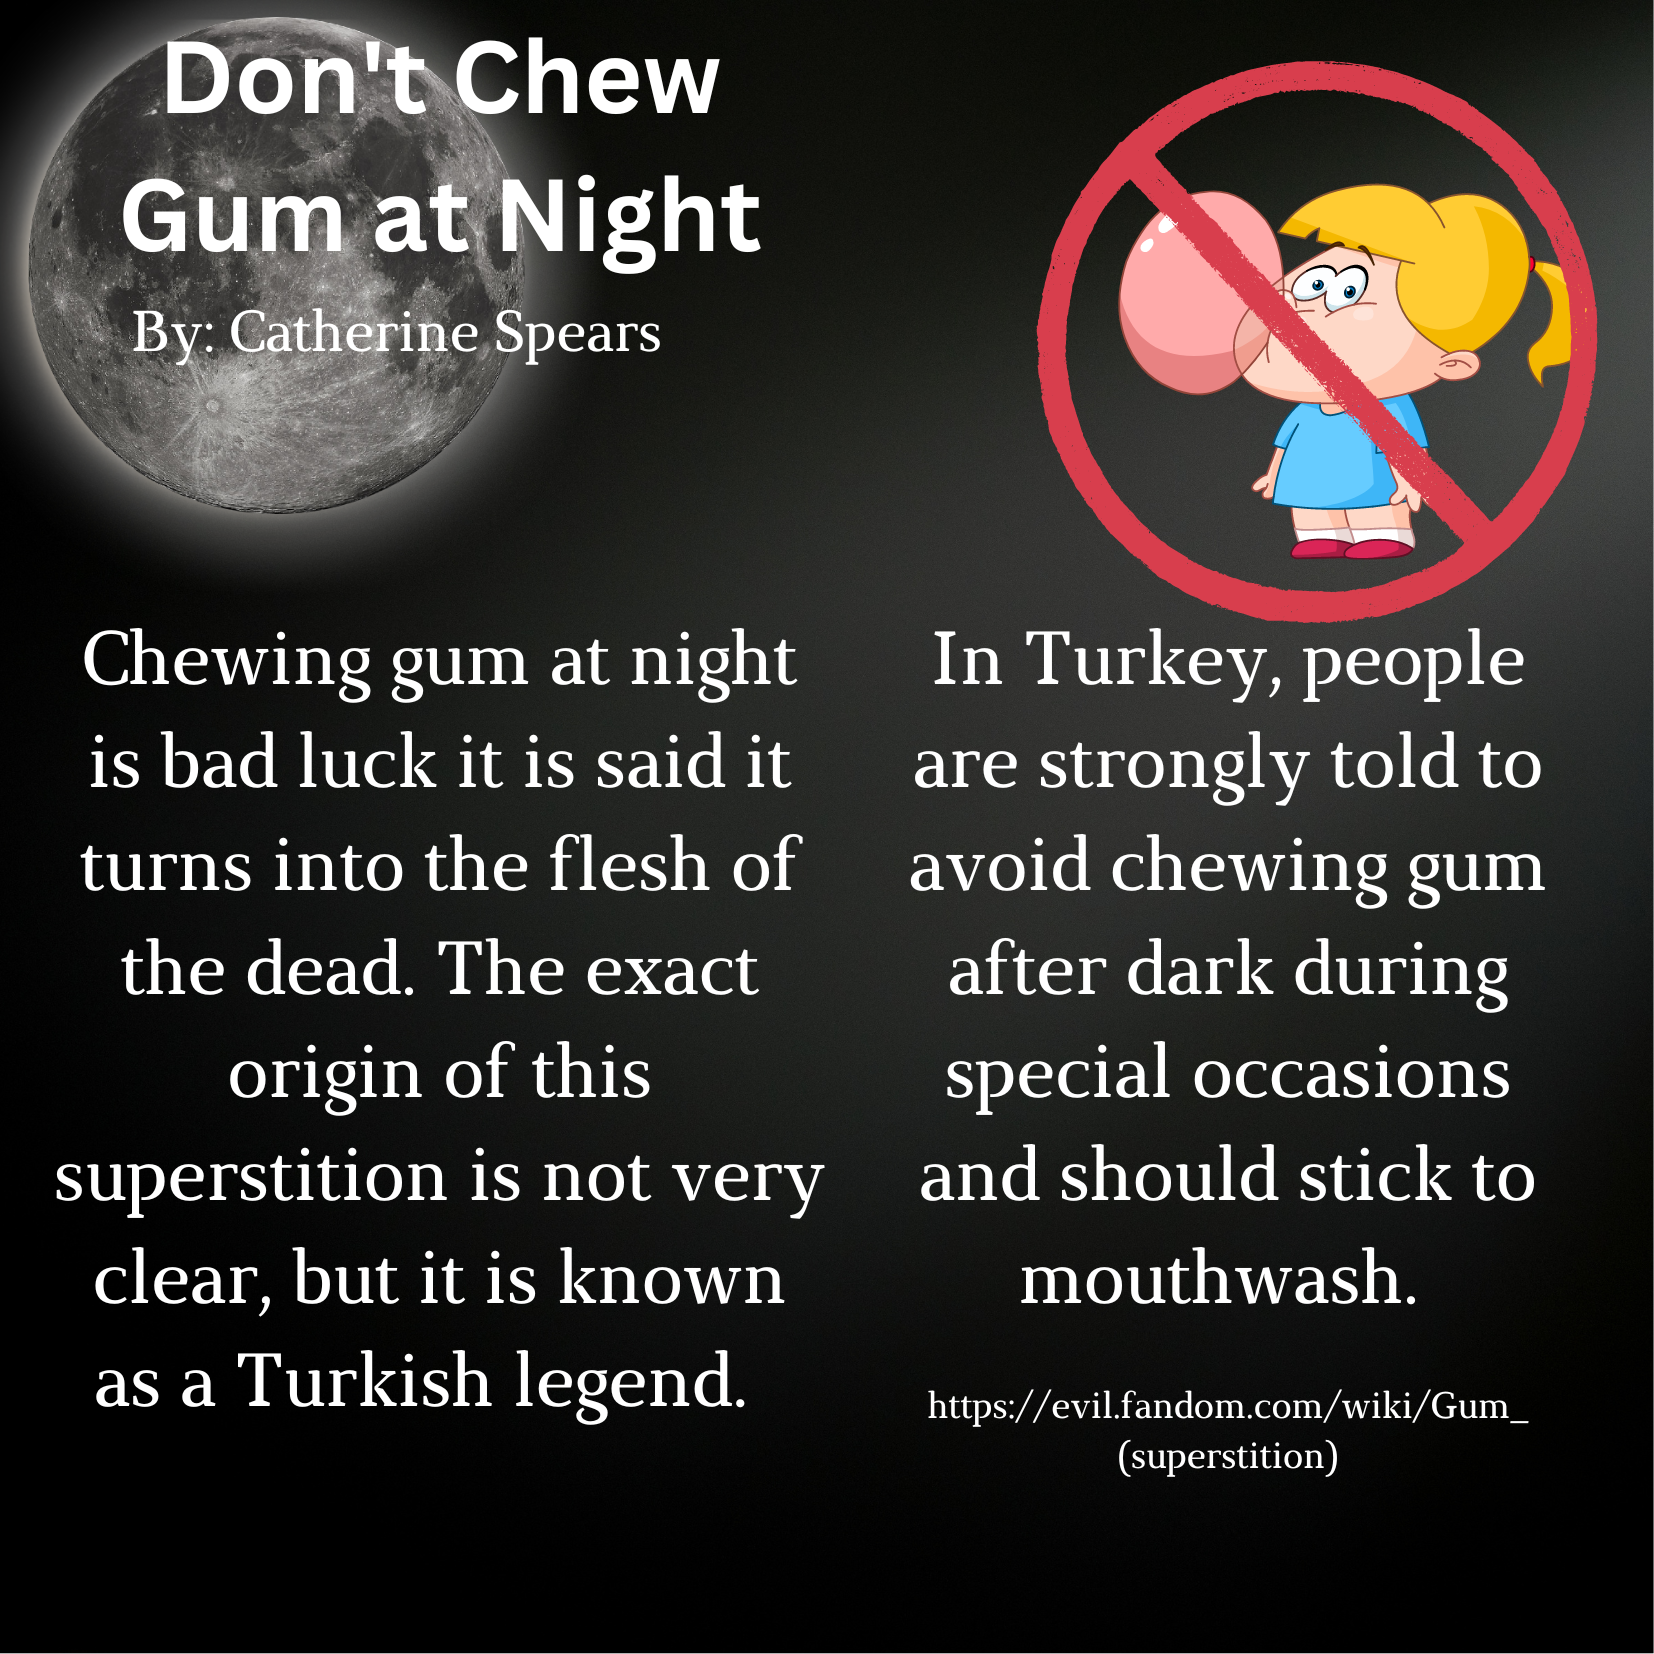 Chewing gum at night is bad luck it is said it turns into the flesh of the dead. The exact origin of this superstition is not very clear, but it is known as a Turkish legend. In Turkey, people are strongly told t.png